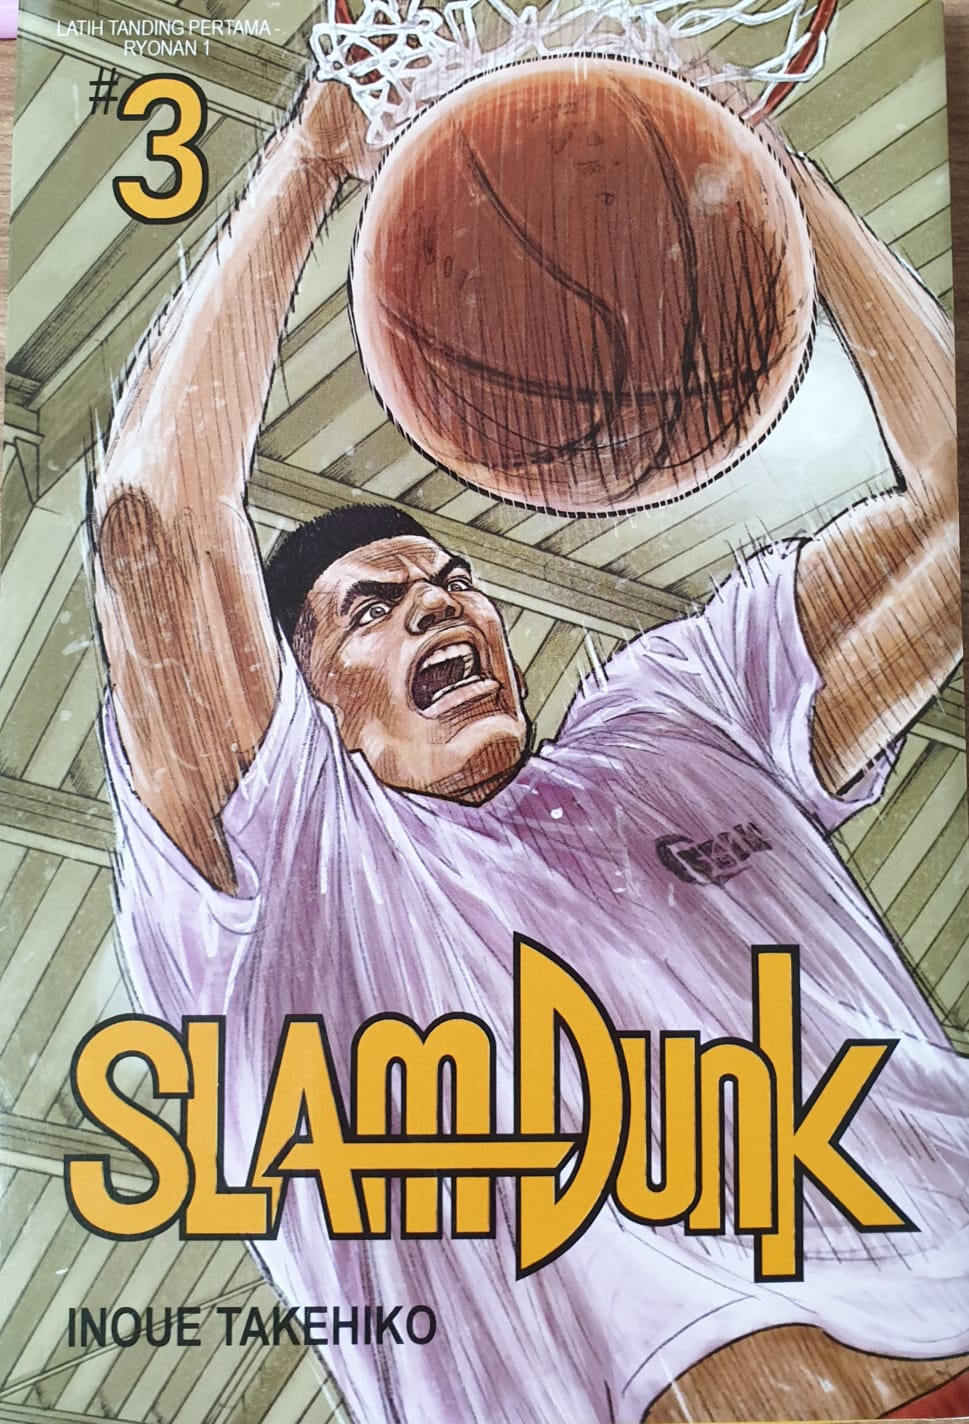 Slam dunk new cover edition 3